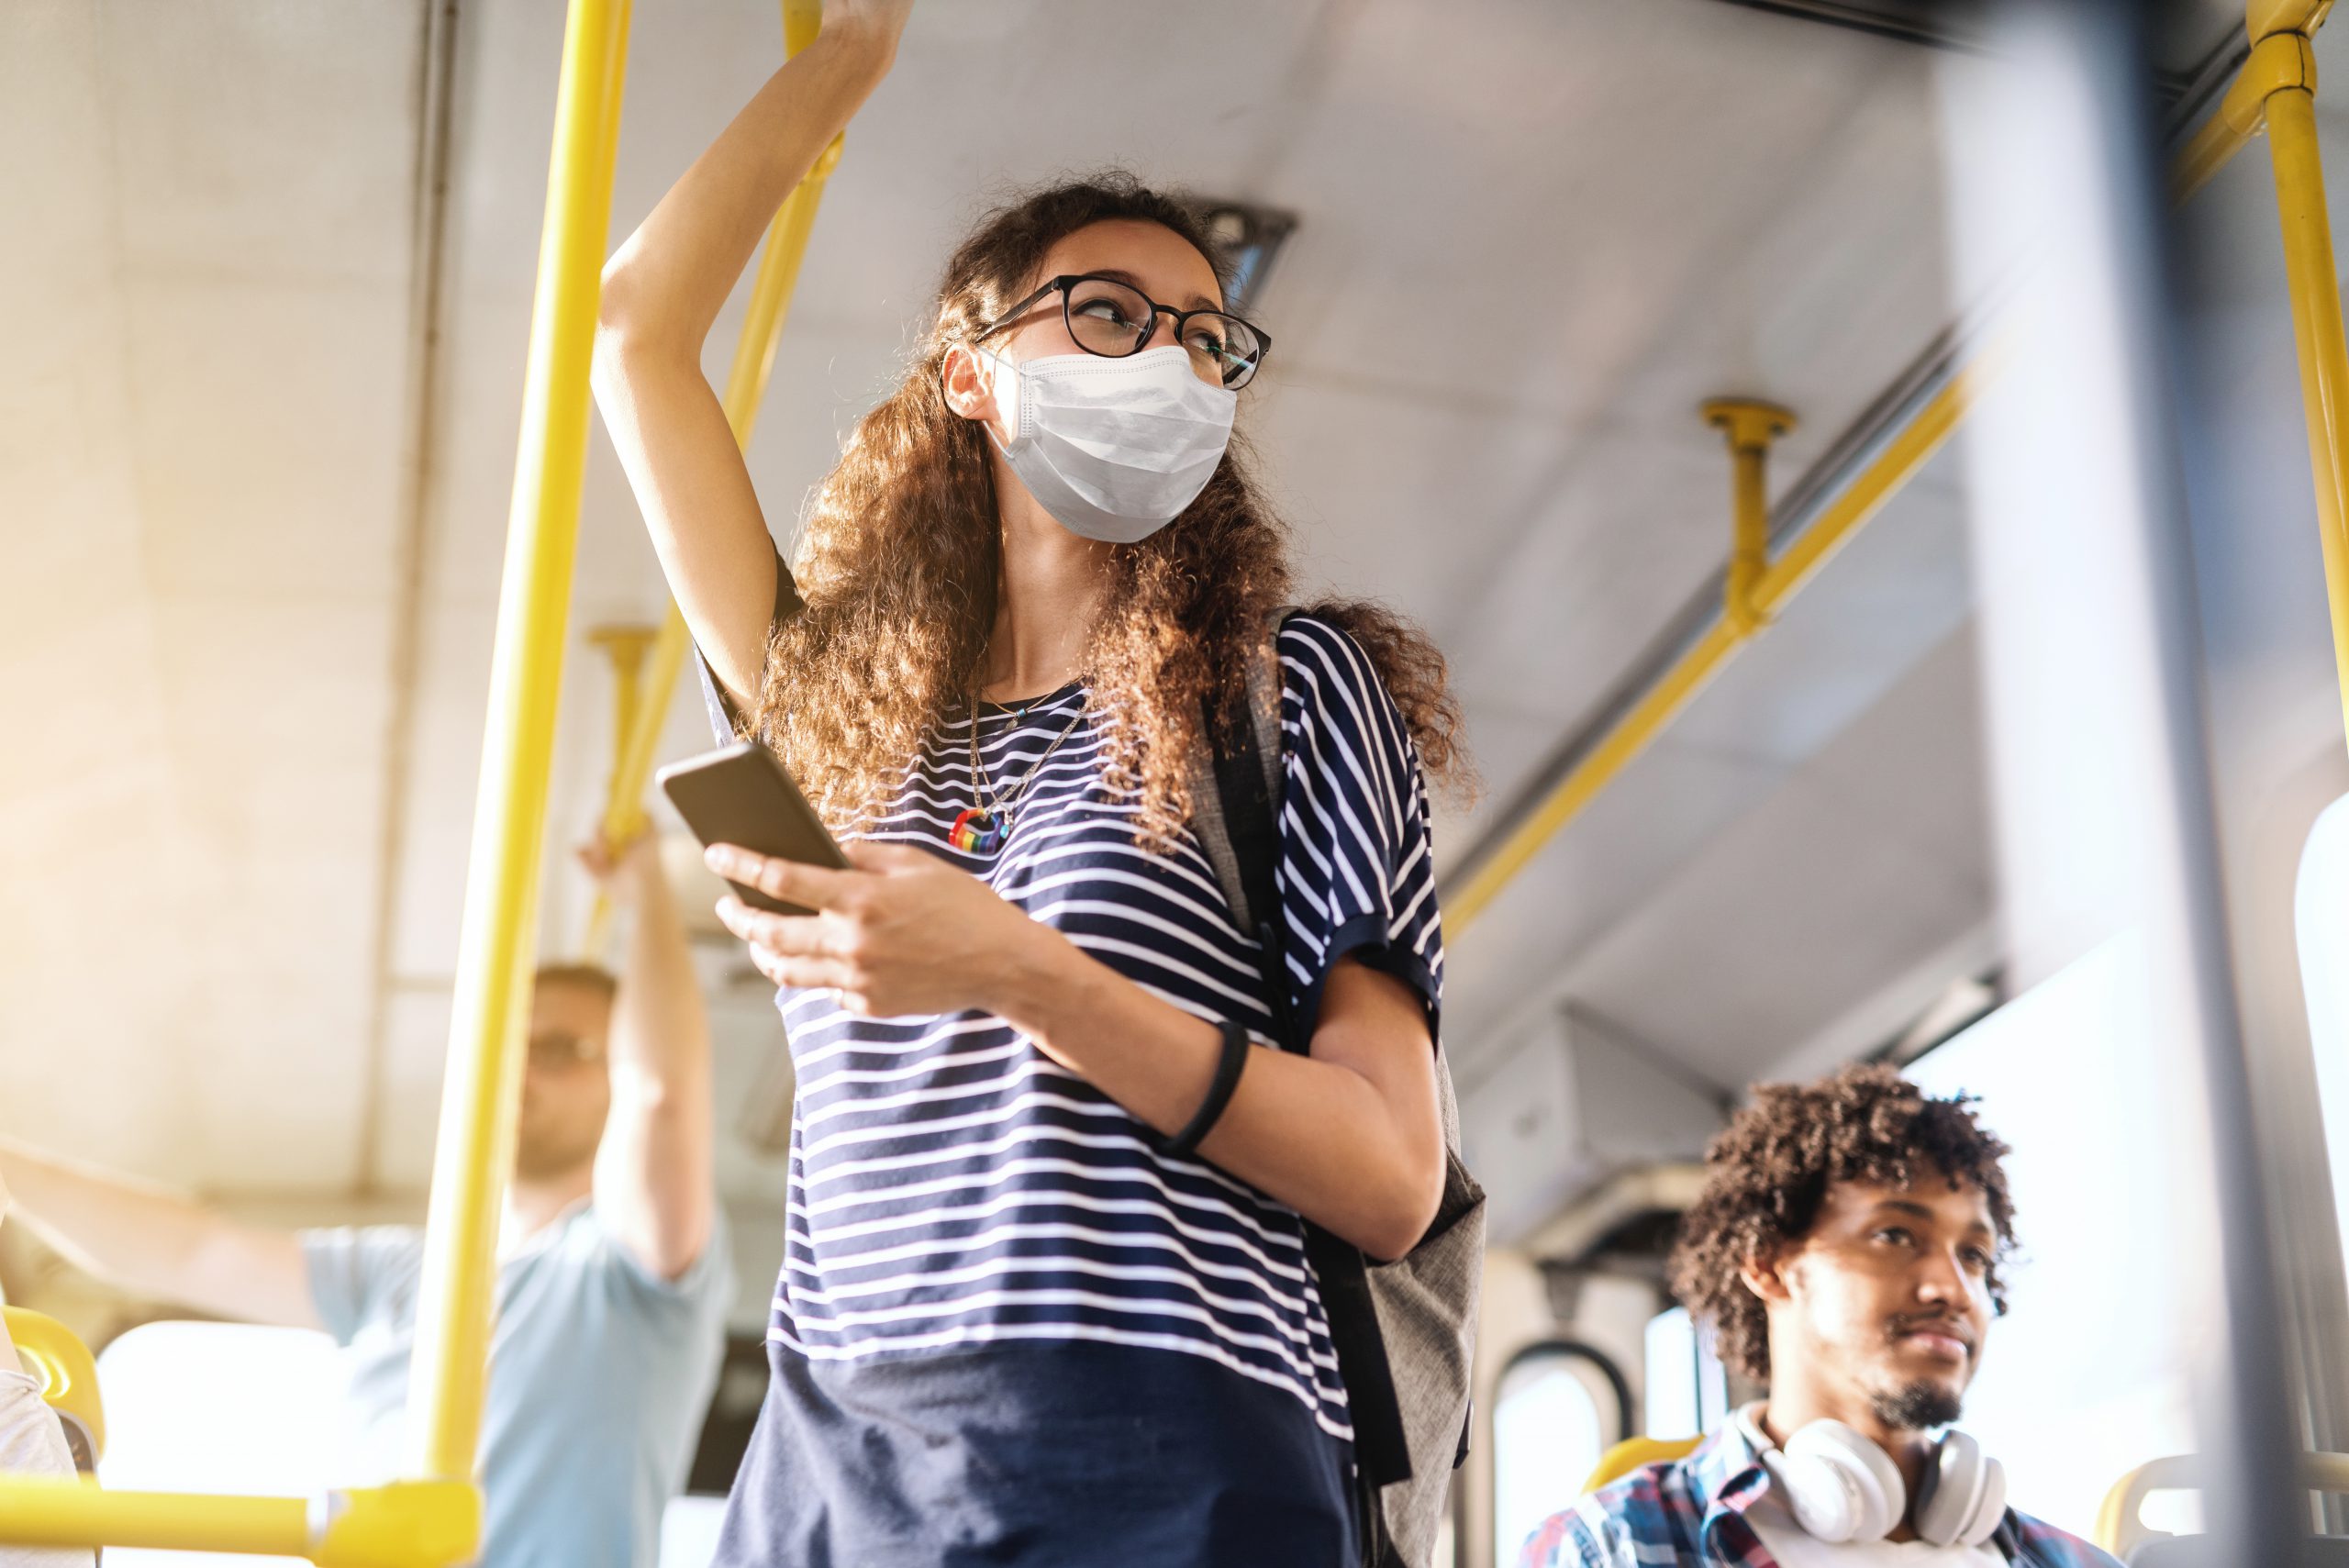 Woman standing on light rail wearing a face mask